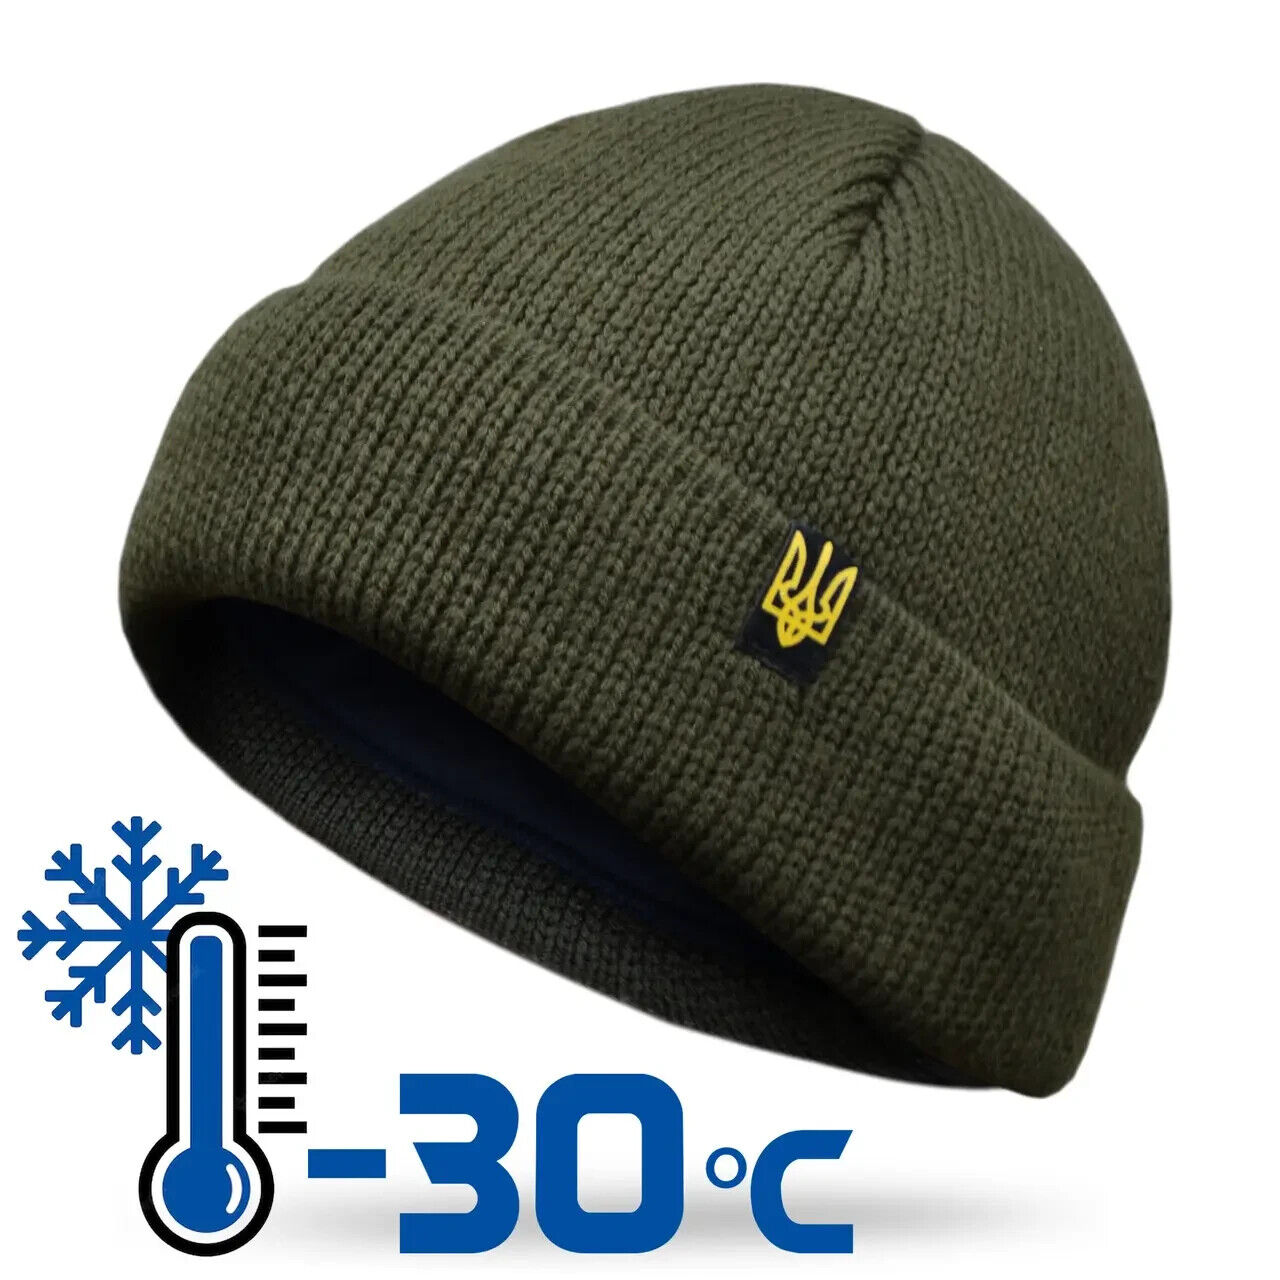 Ukrainian Army winter Hat knitted olive khaki military hat.